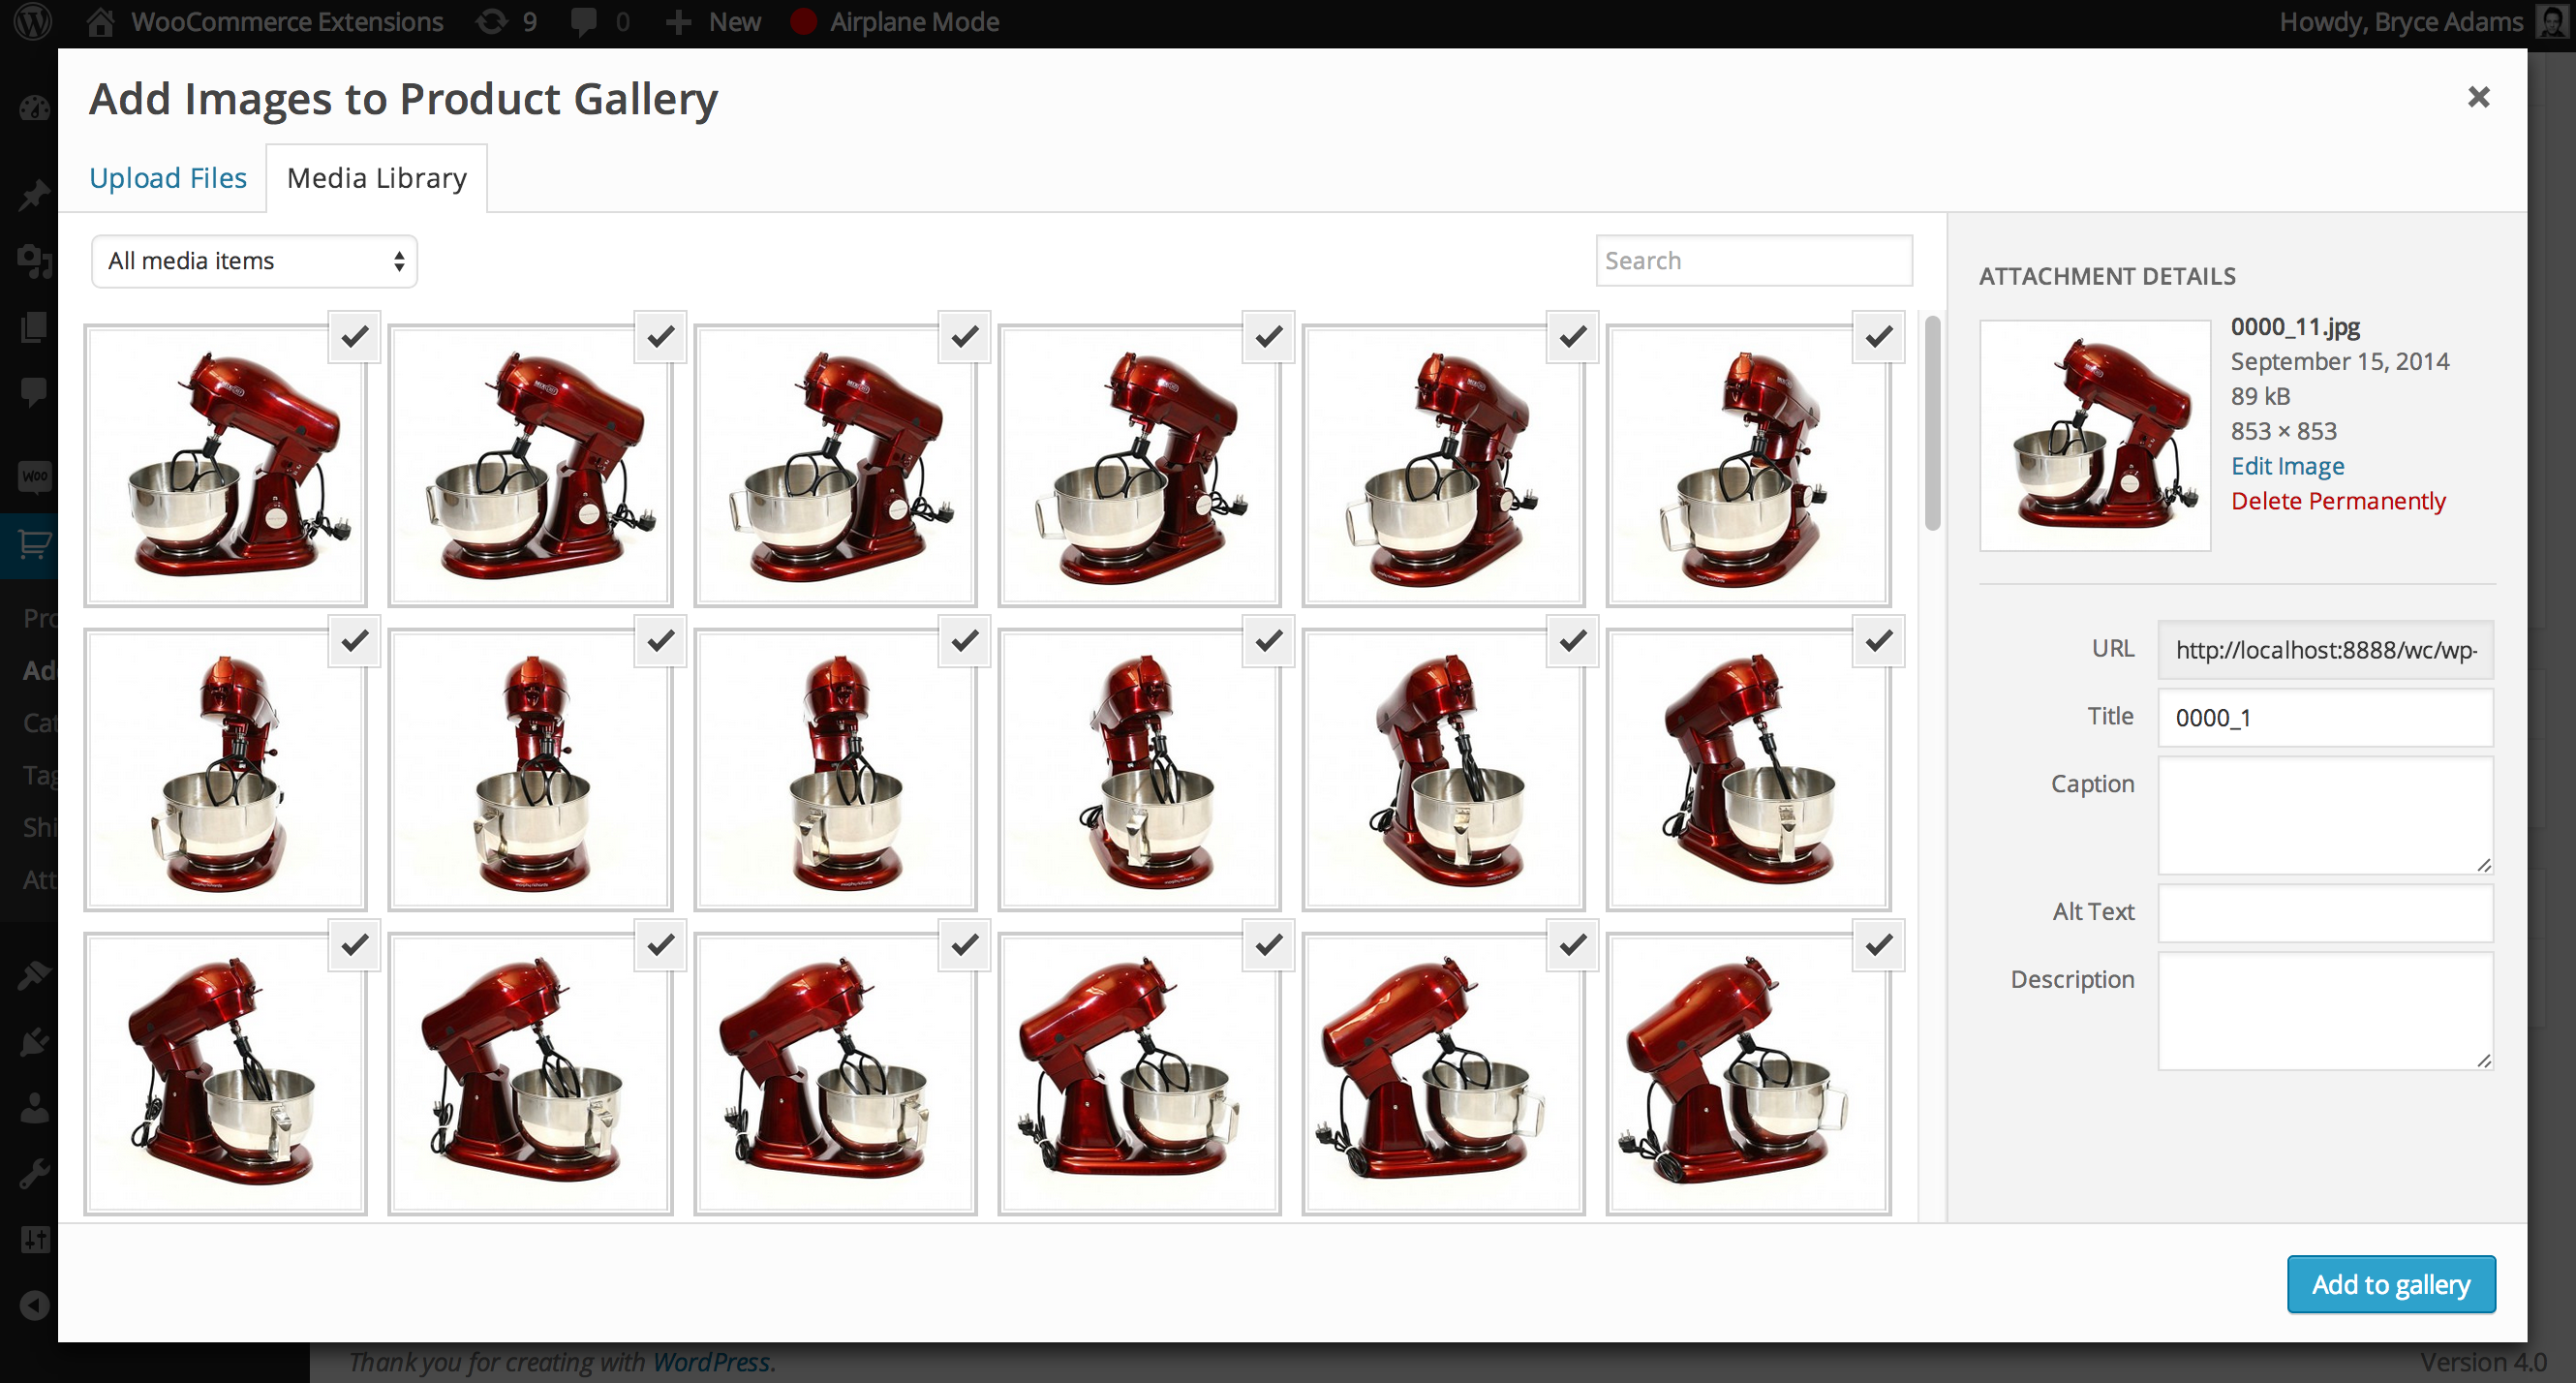 View of images at various angles of rotation as seen in the Add Images to Product Gallery modal